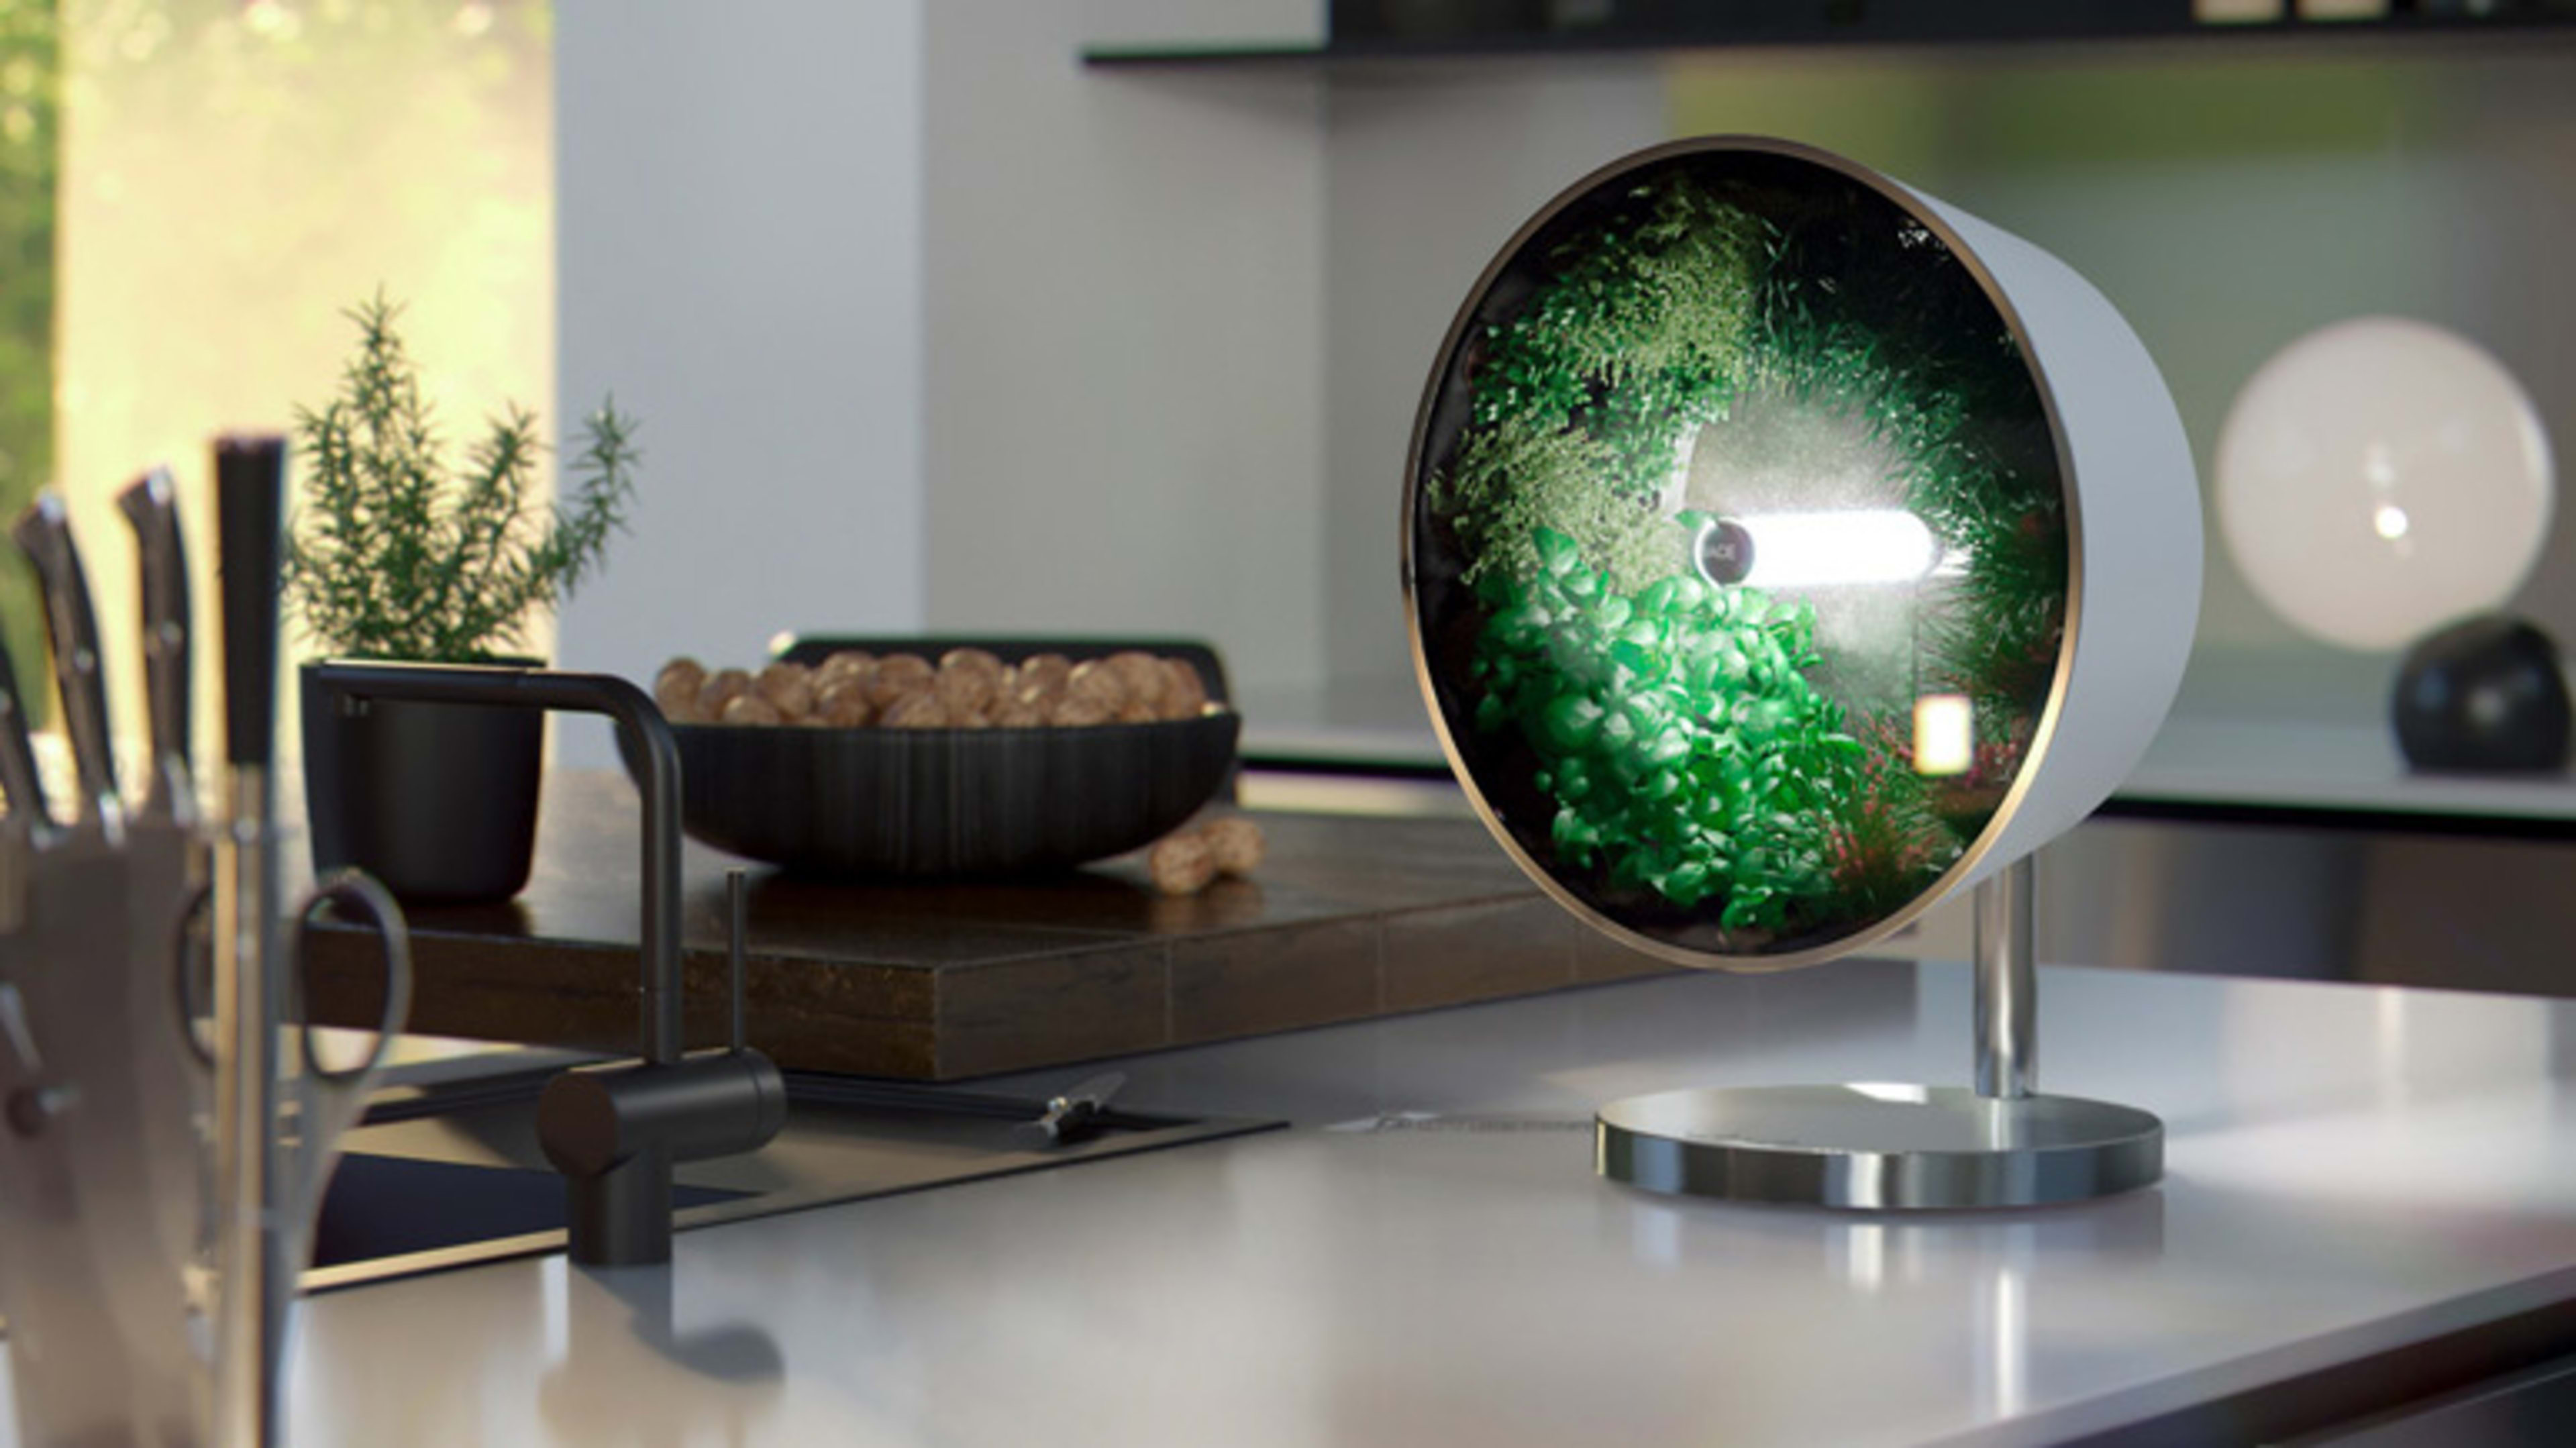 This brilliant hydroponic system puts a whole garden on your countertop